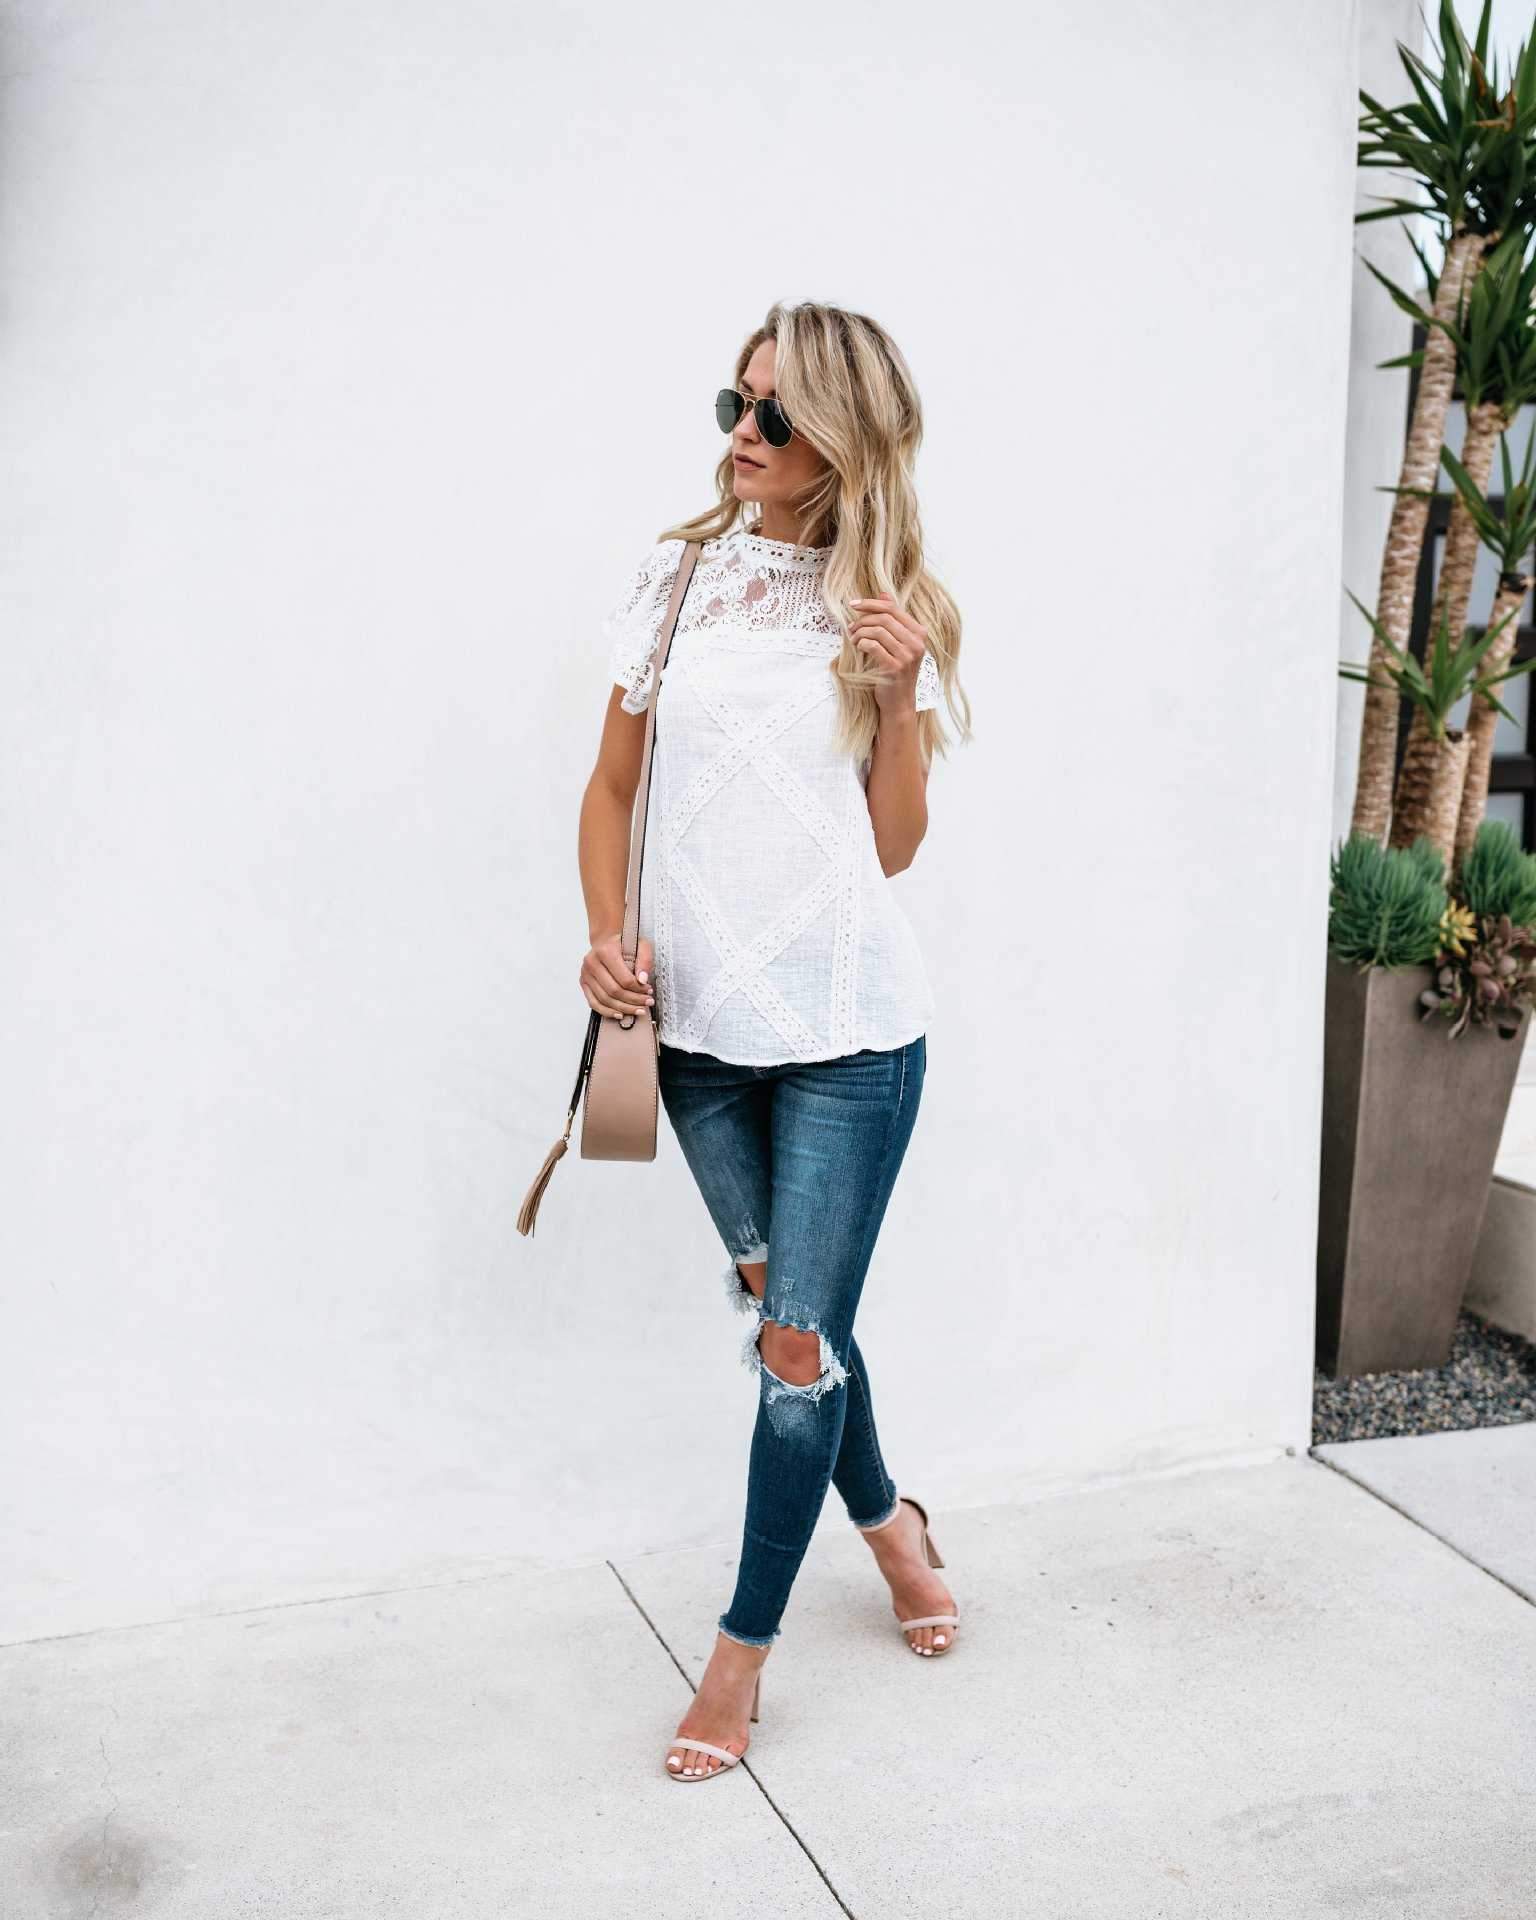 Cute Boho Chic Short Sleeve Lace Shoulder Blouse Shirts on sale - SOUISEE